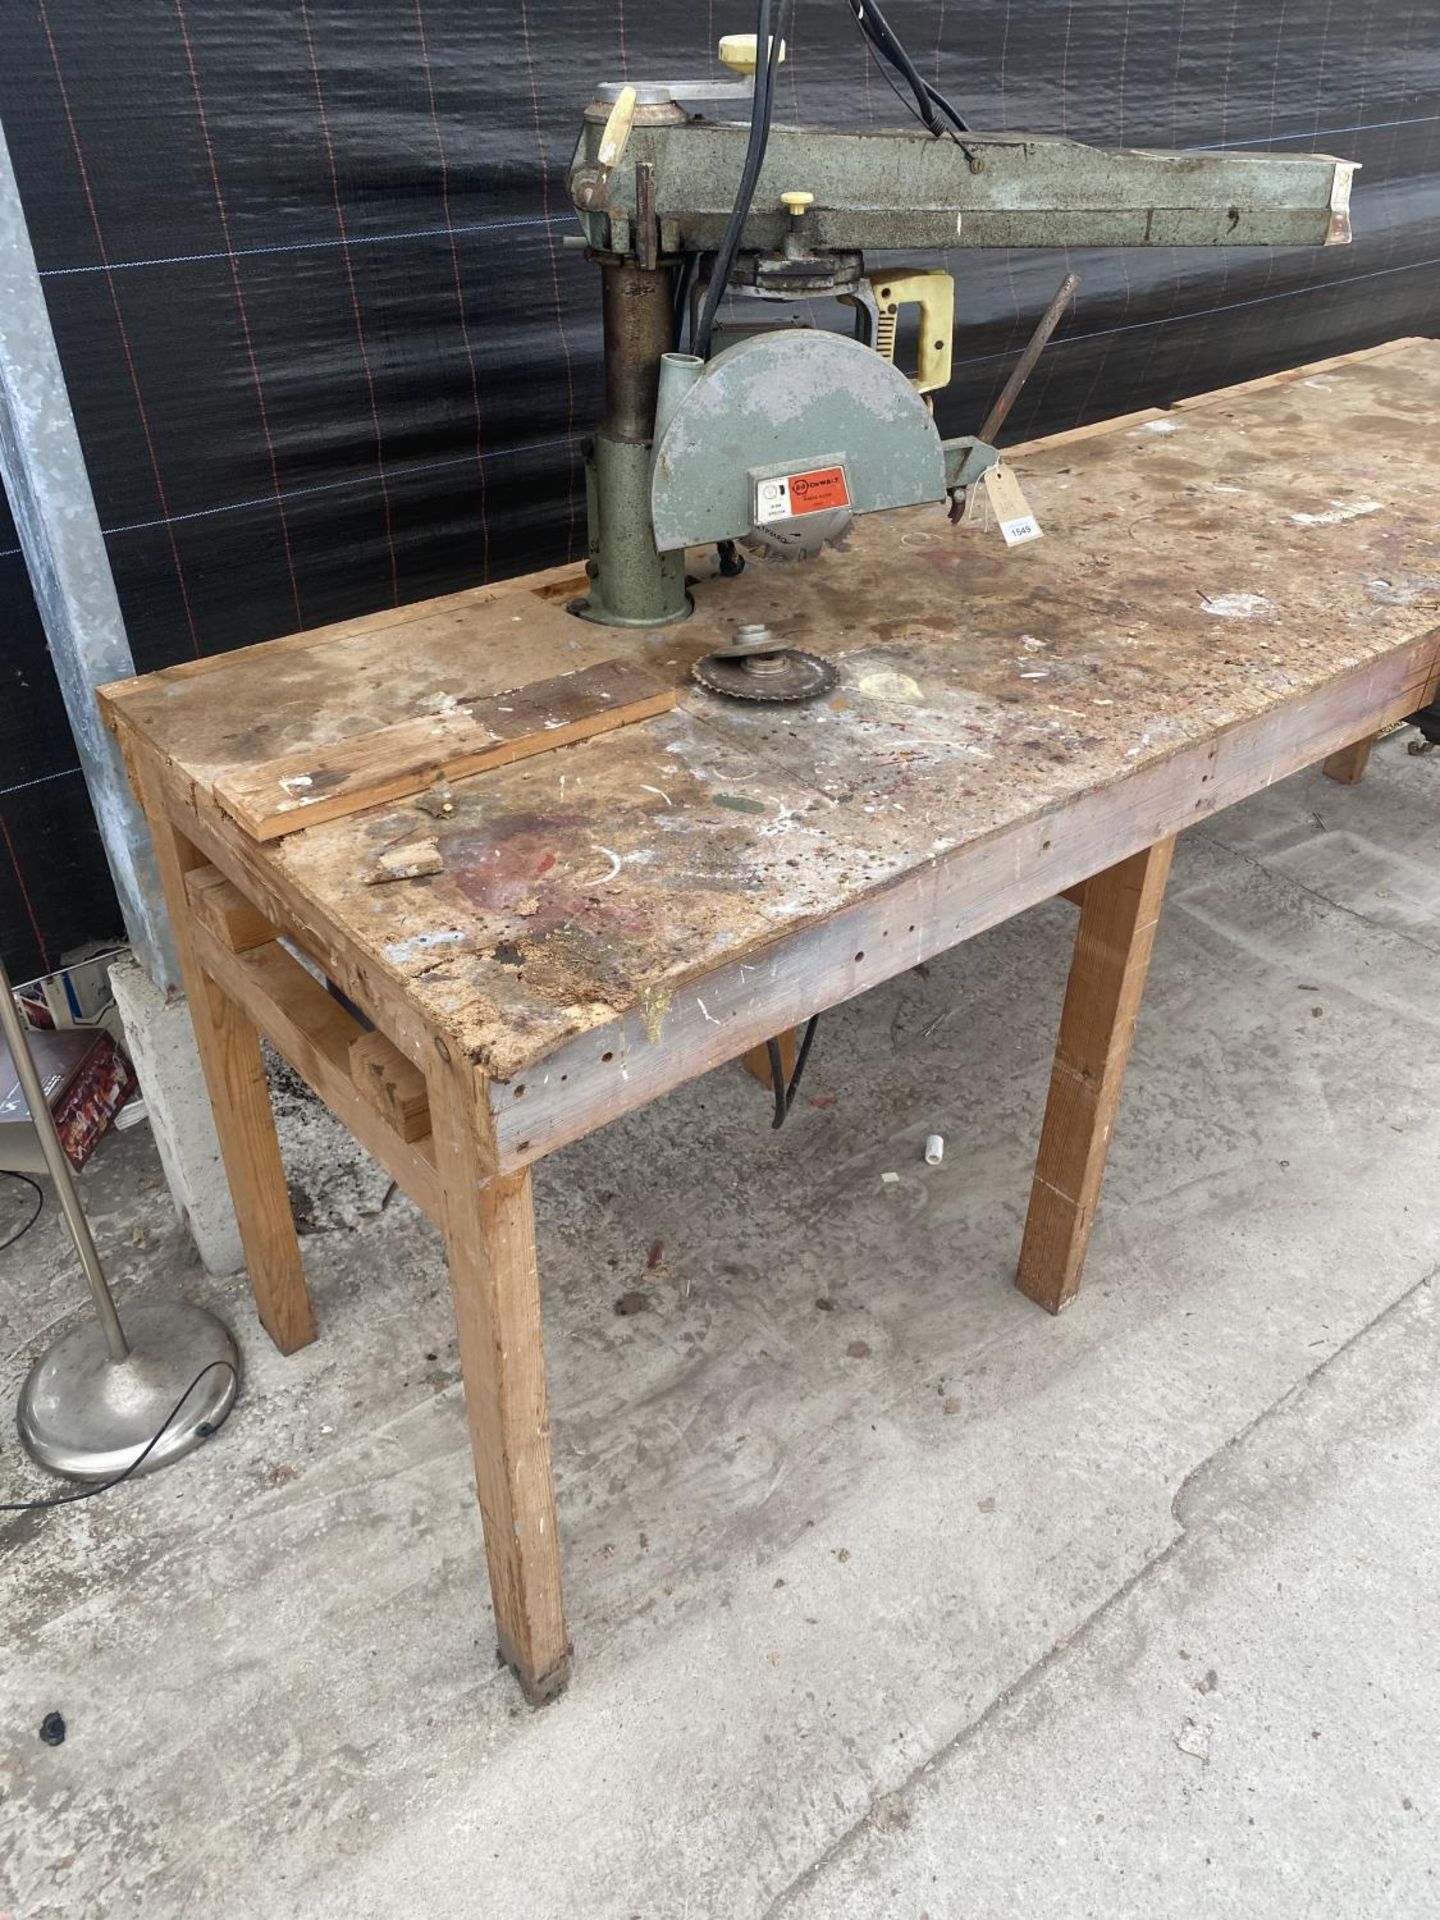 A LARGE INDUSTRIAL HEAVY DUTY WORK BENCH WITH RECORD BENCH VICE AND DEWALT CIRCULAR SAW - Image 4 of 4